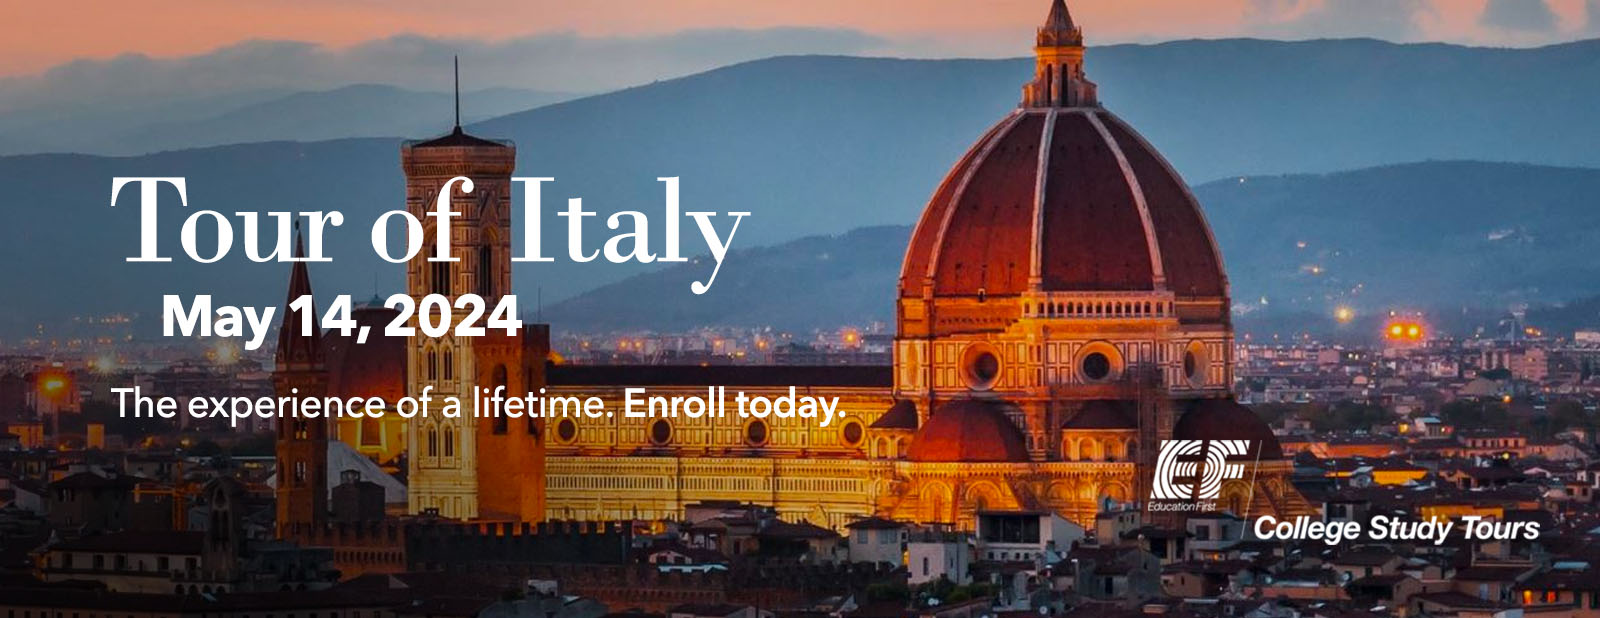 travel to italy 2024 requirements